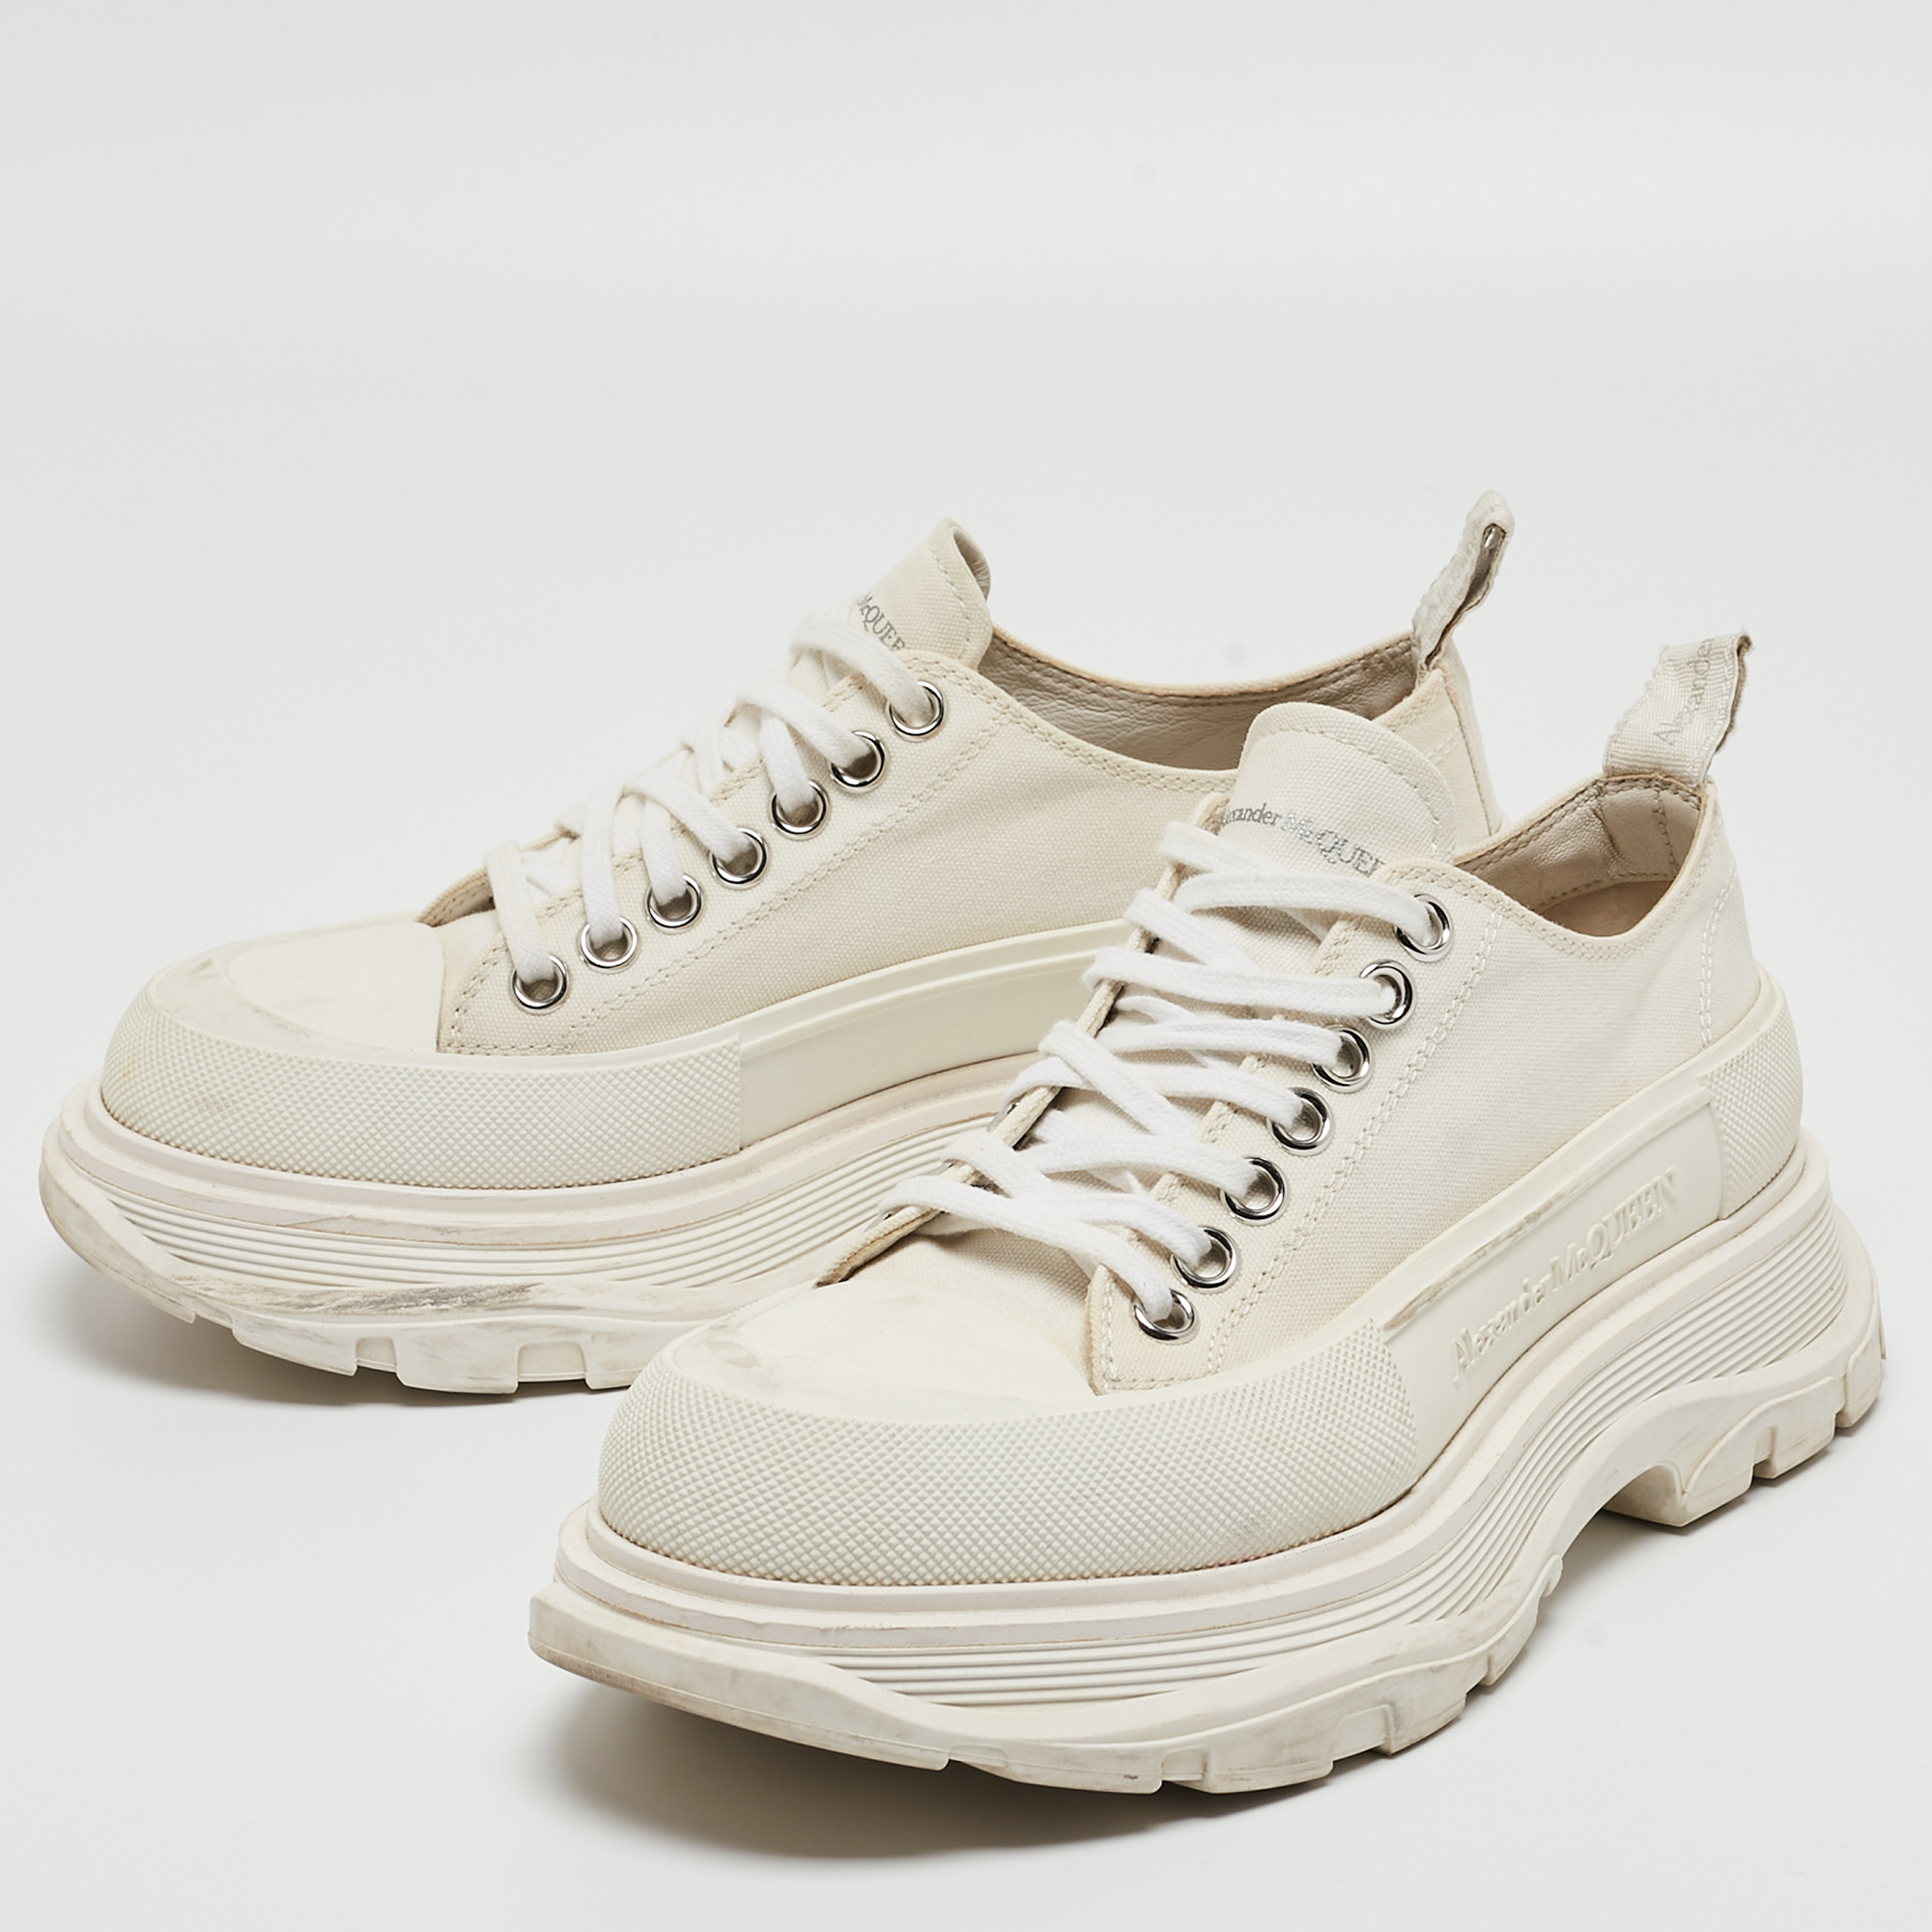 

Alexander Mcqueen White Canvas and Rubber Tread Slick Sneakers Size